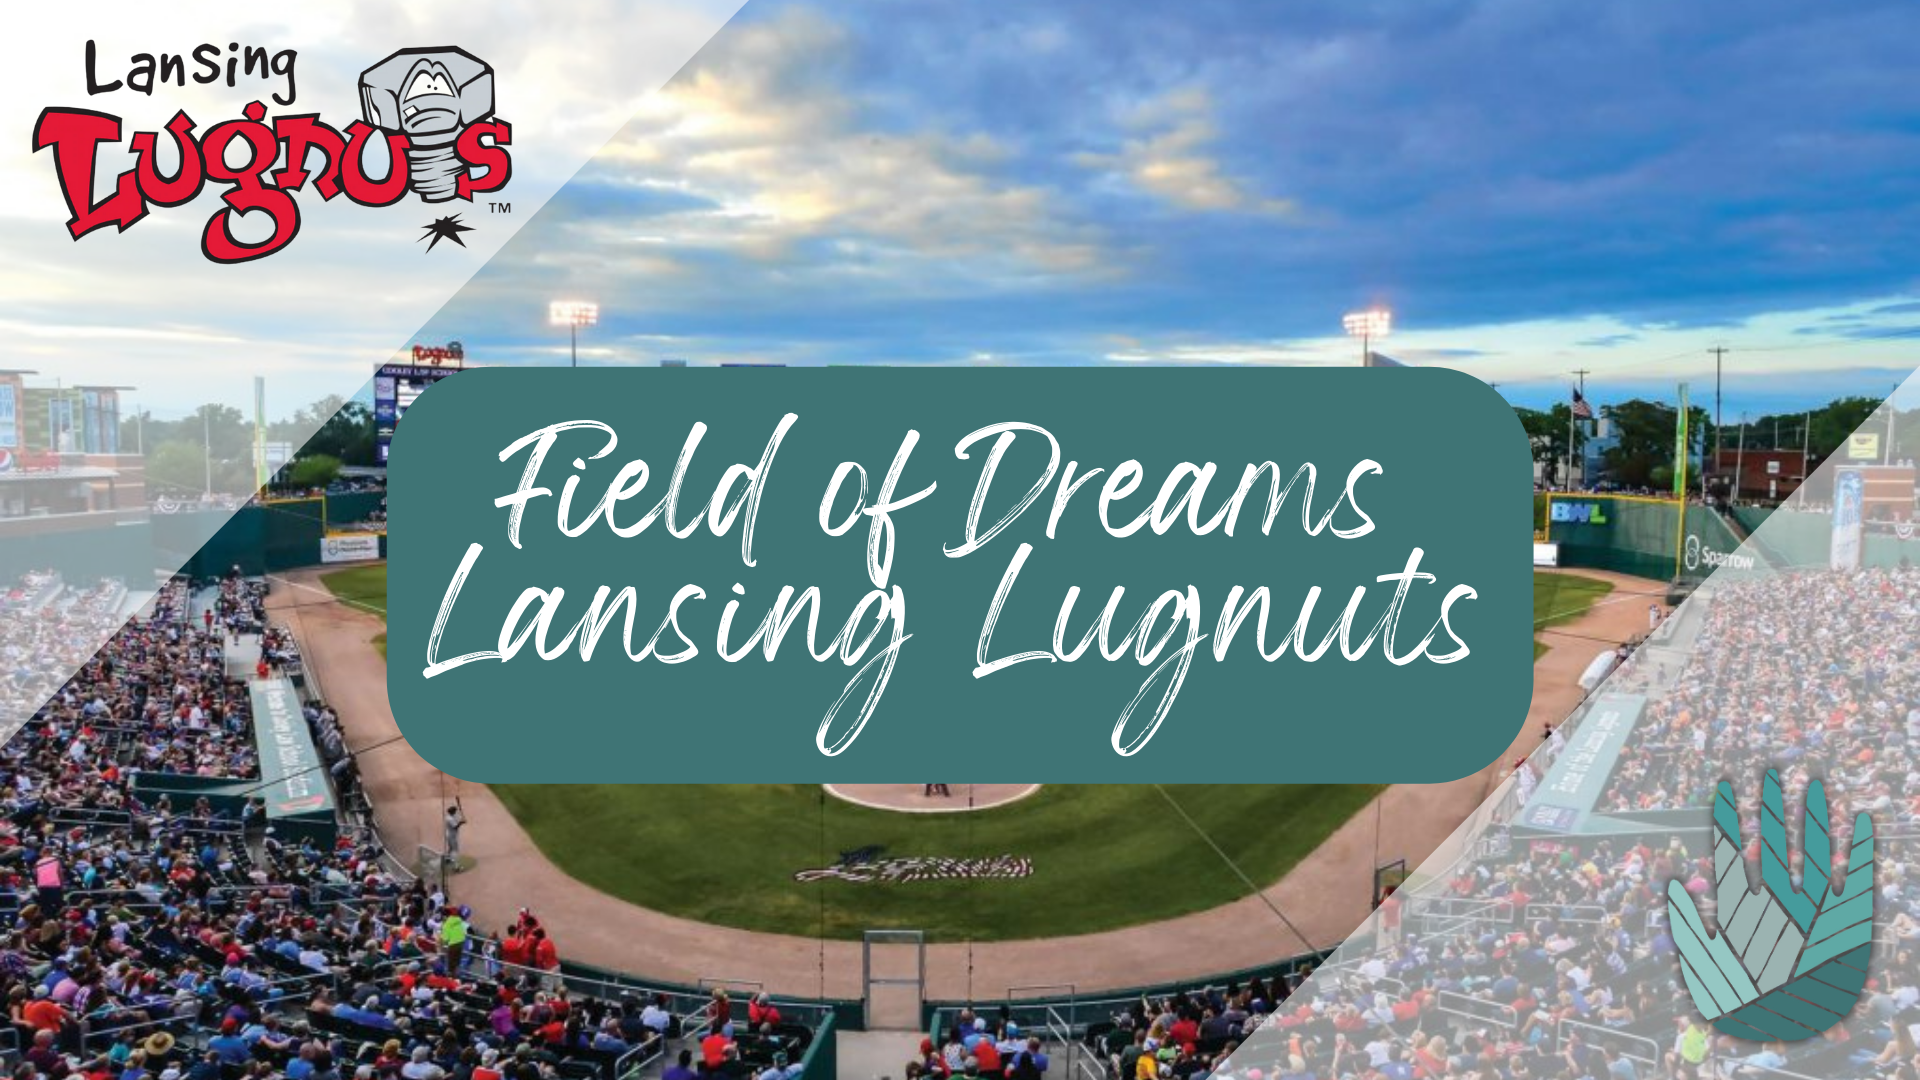 Living in Lansing Lugnuts' ballpark possible if things work out for Blue  Jays' affiliate - Bluebird Banter